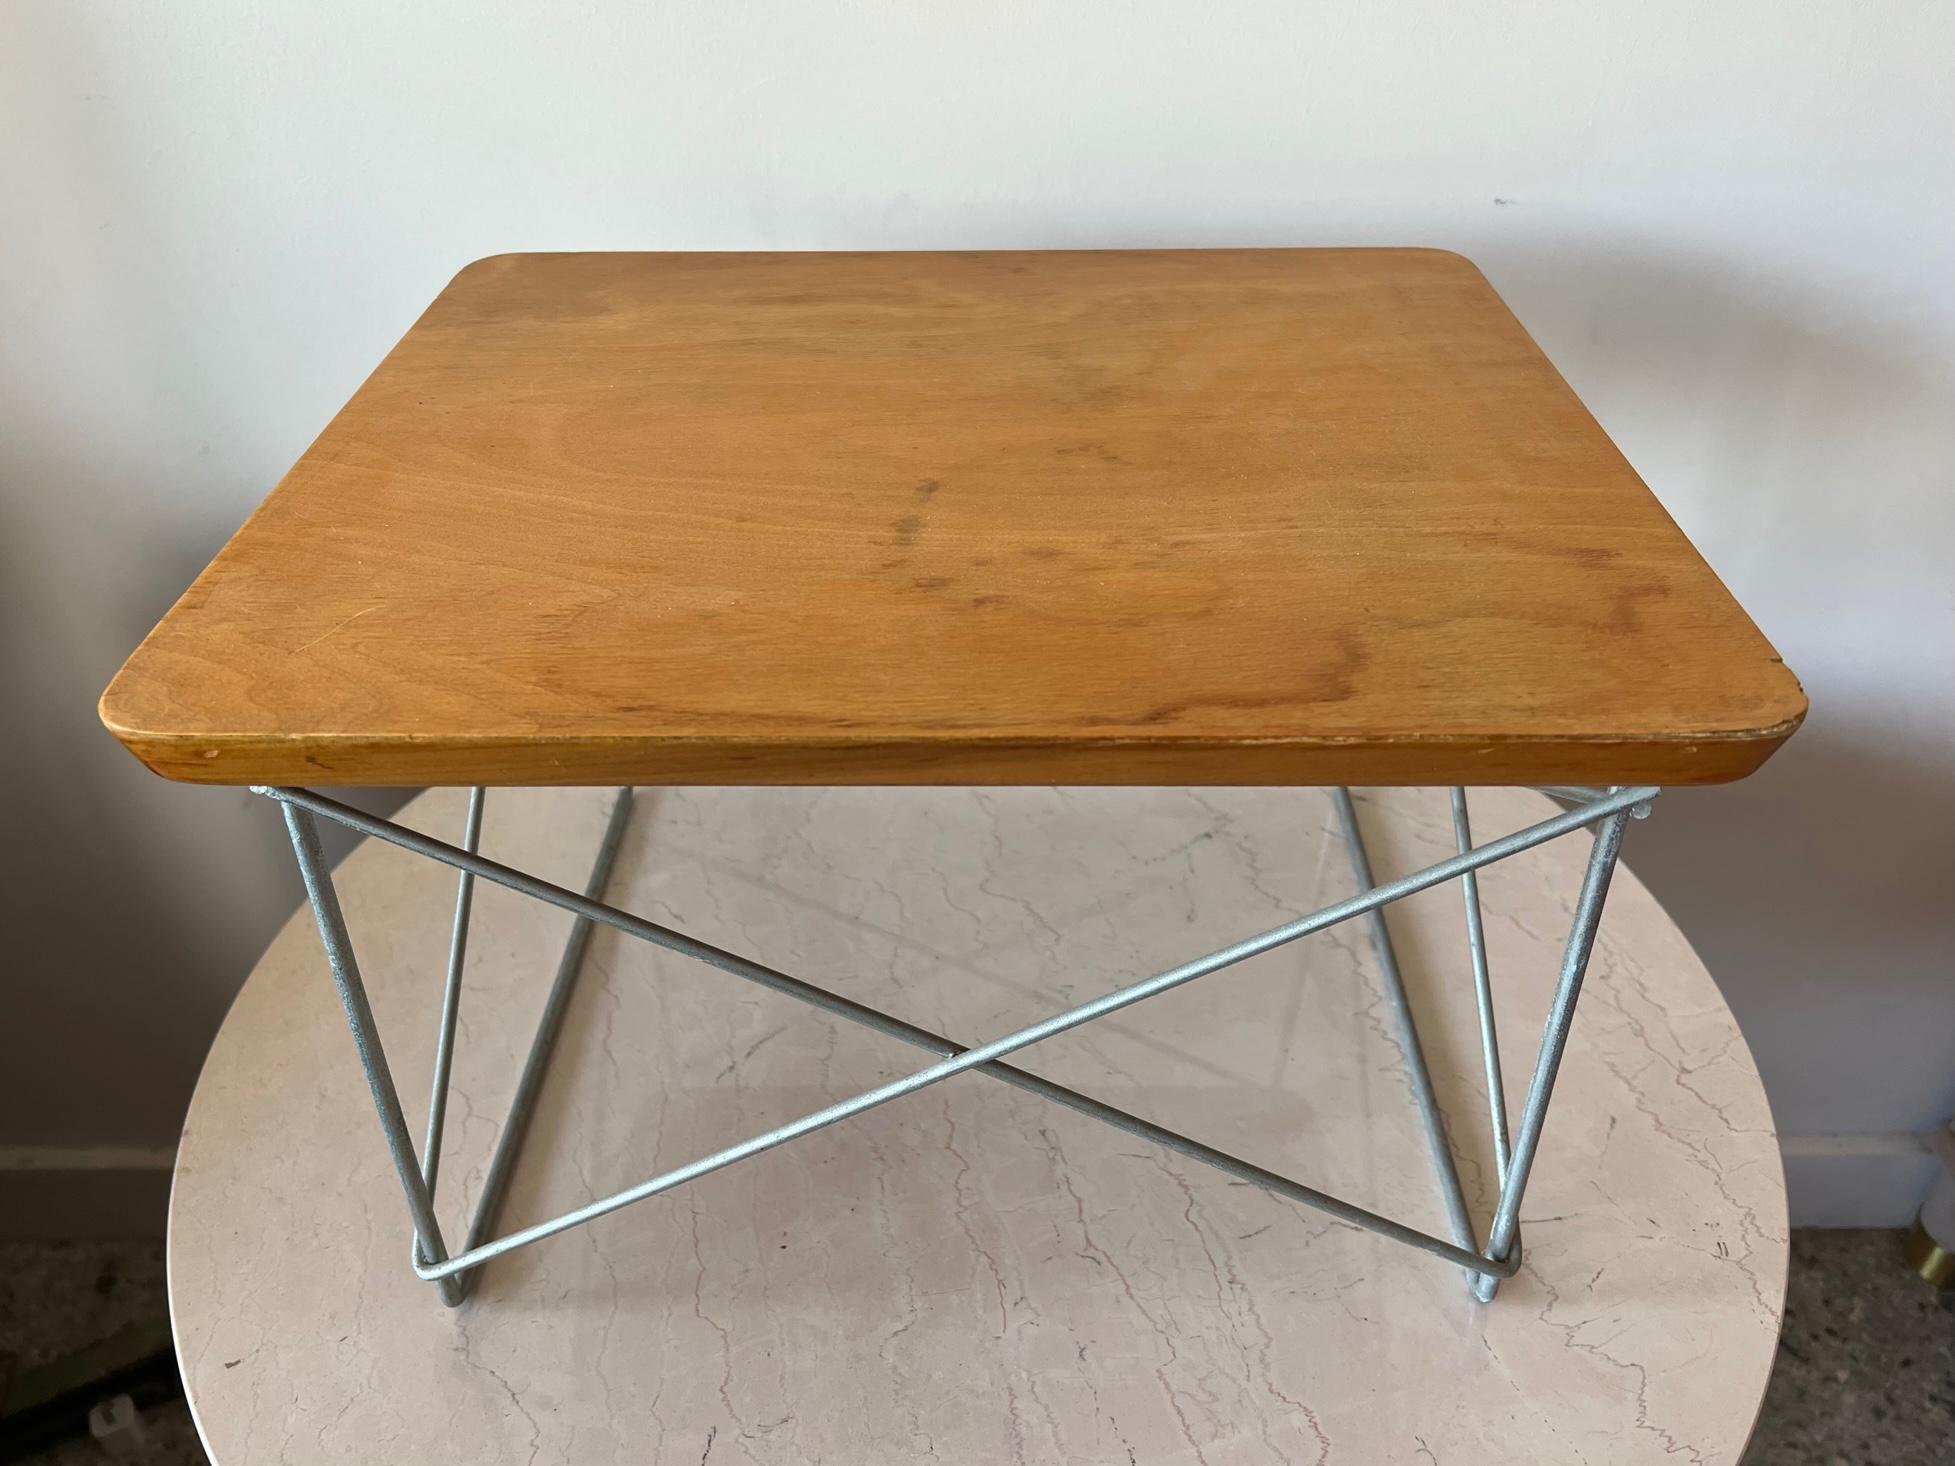 A fine Charles Eames, LTR table. Birch veneer, zinc base, all original-unrestored. Signed with a medallion label underneath.